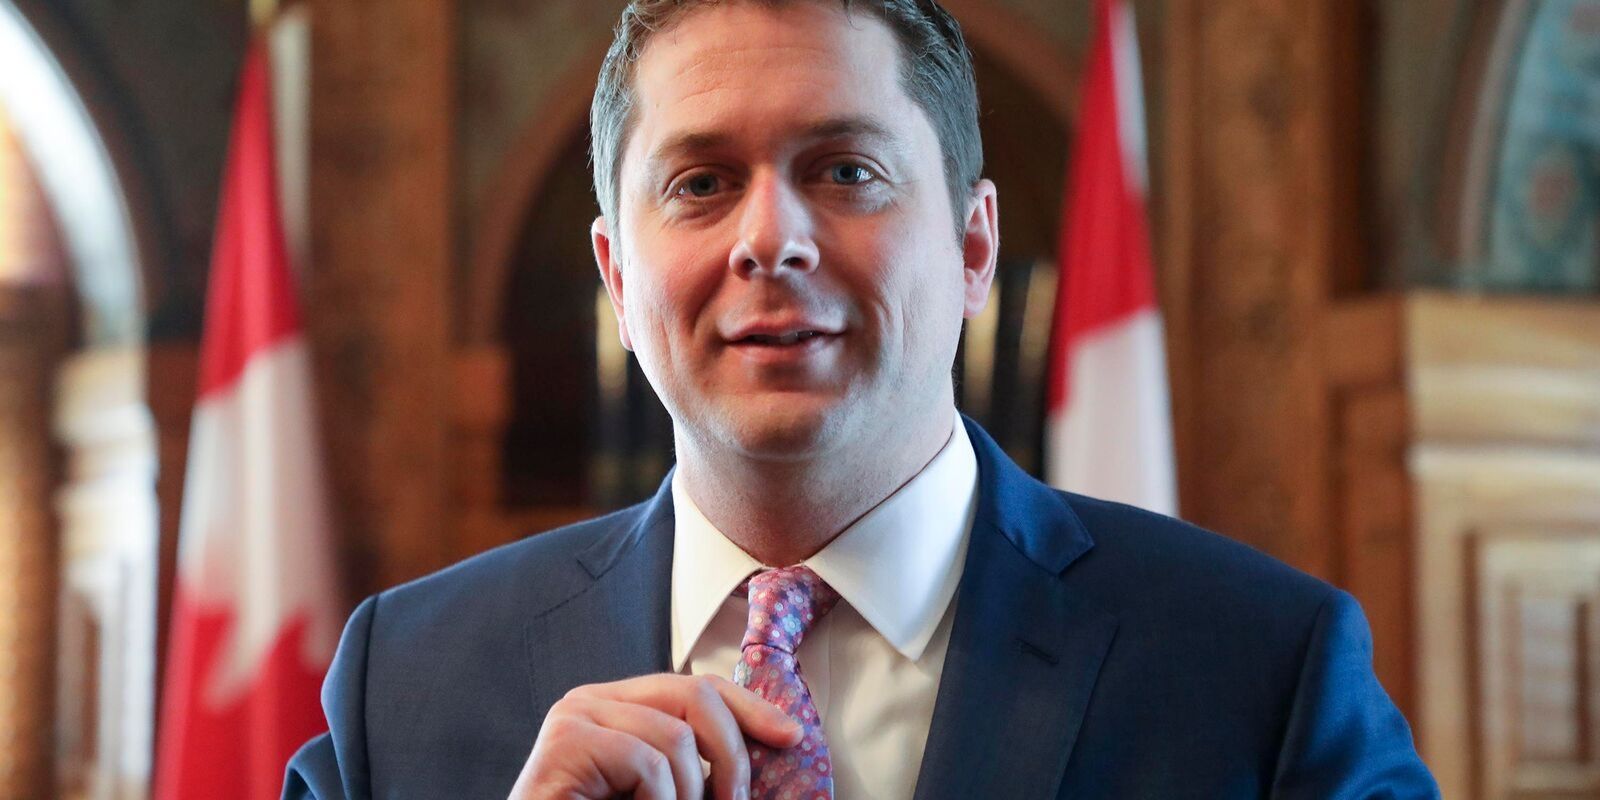 Andrew Scheer accused of lying about being an insurance broker